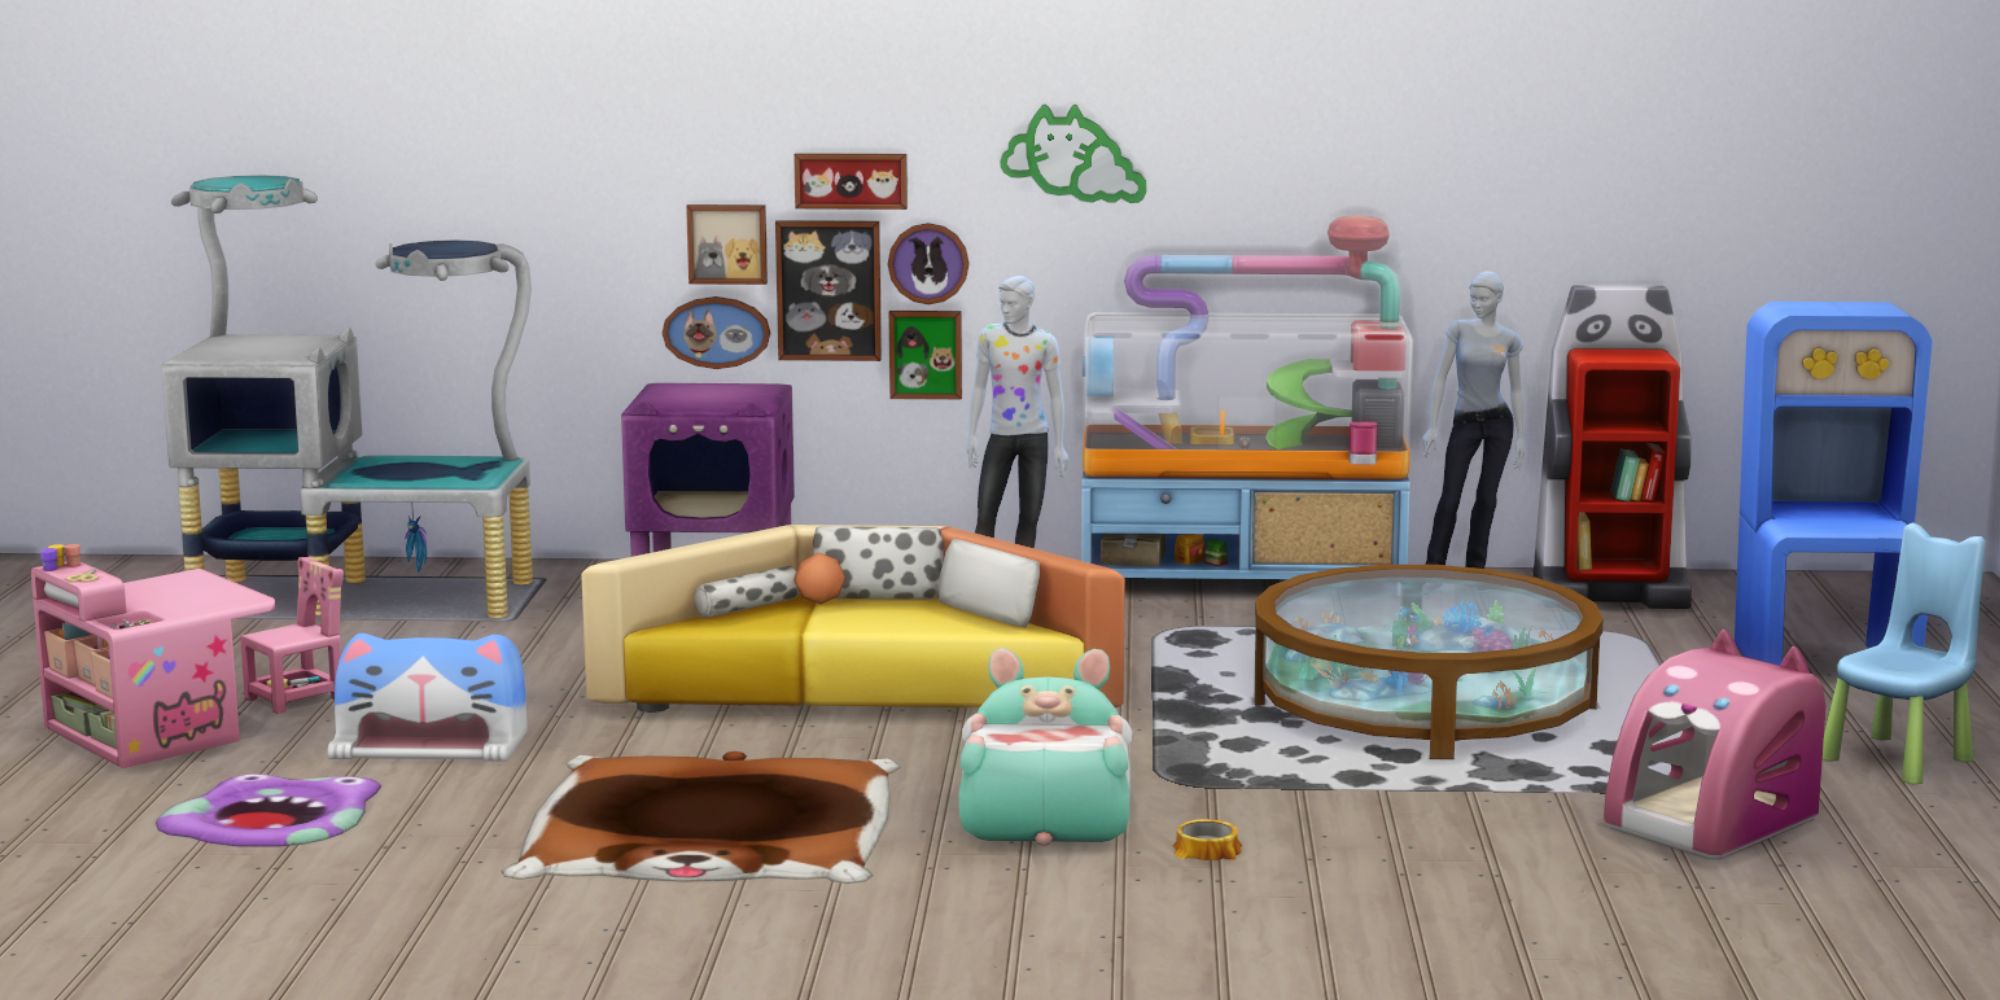 Sims 4 MFPS Items All In A Room